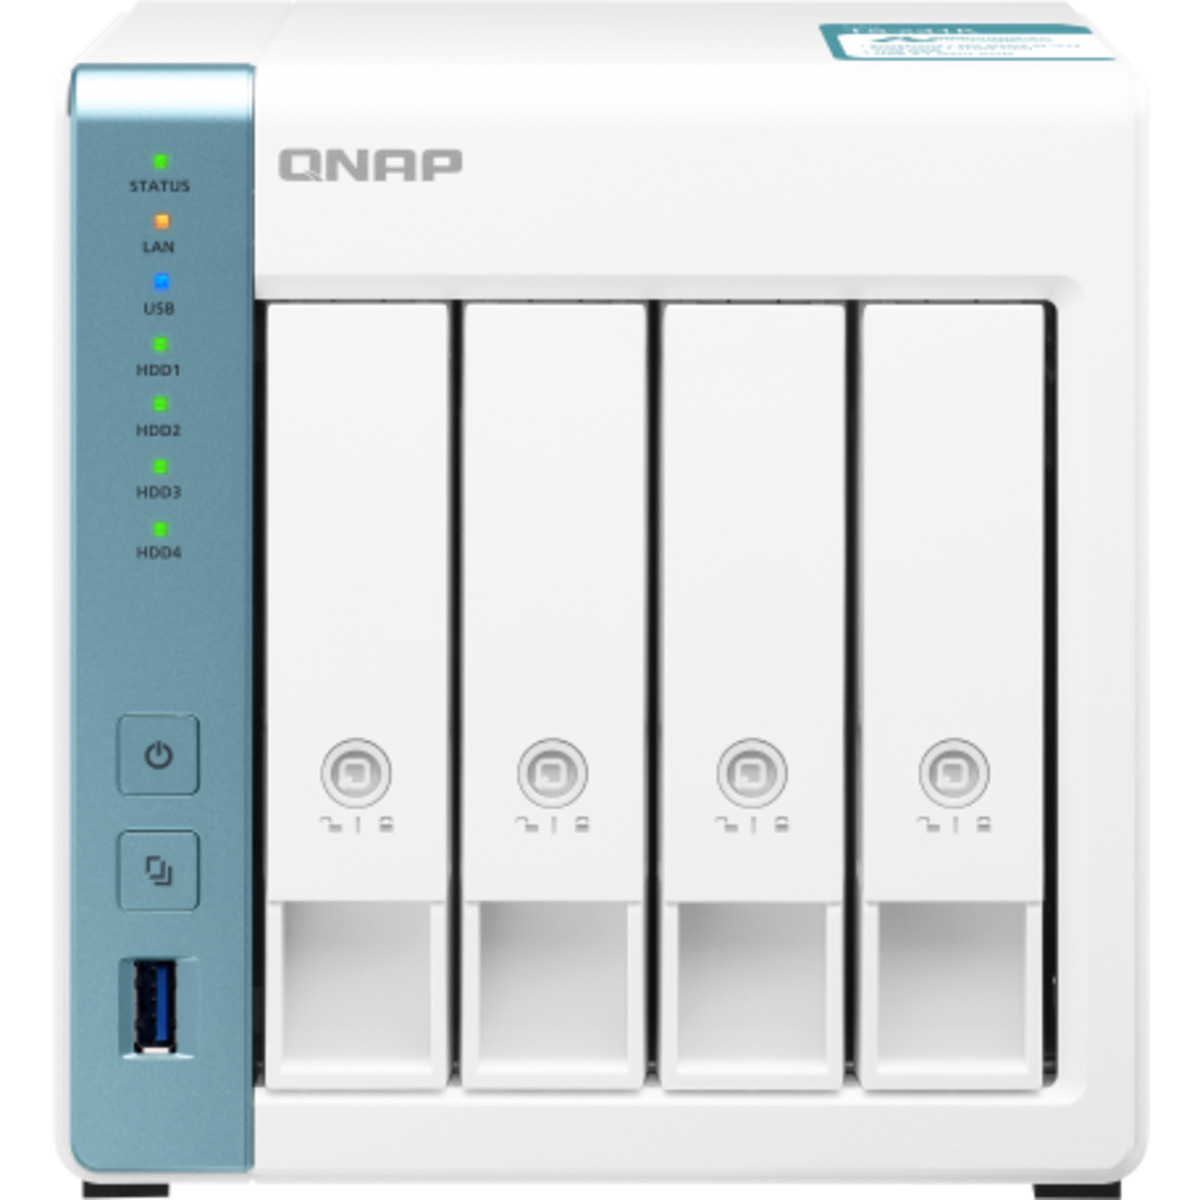 buy $2155 QNAP TS-431K 72tb Desktop NAS - Network Attached Storage Device 4x18000gb Toshiba Enterprise Capacity MG09ACA18TE 3.5 7200rpm SATA 6Gb/s HDD ENTERPRISE Class Drives Installed - Burn-In Tested - nas headquarters buy network attached storage server device das new raid-5 free shipping usa christmas new year holiday sale TS-431K